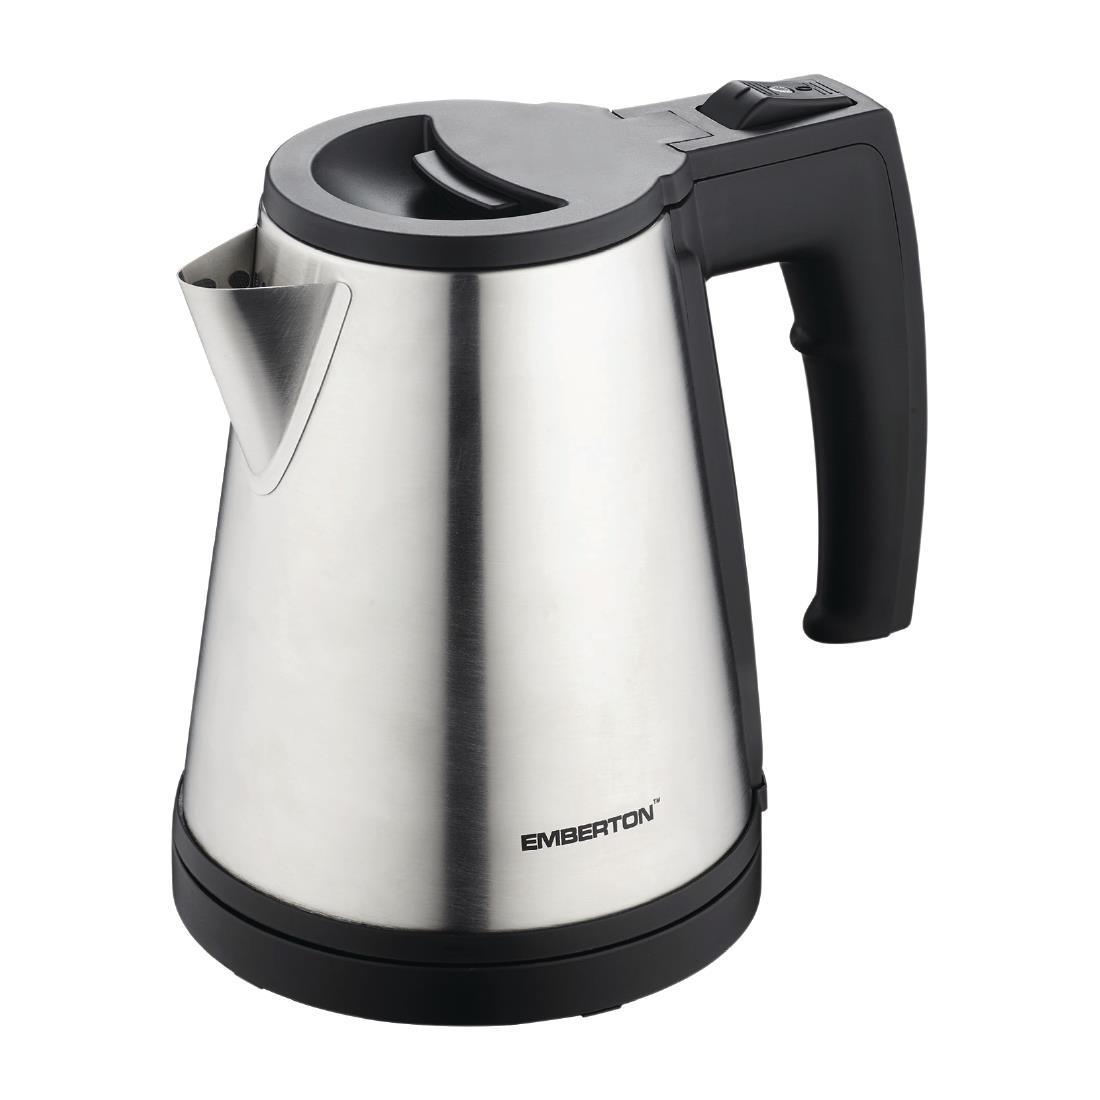 Stainless Steel Kettle 500ml - CL111  - 1